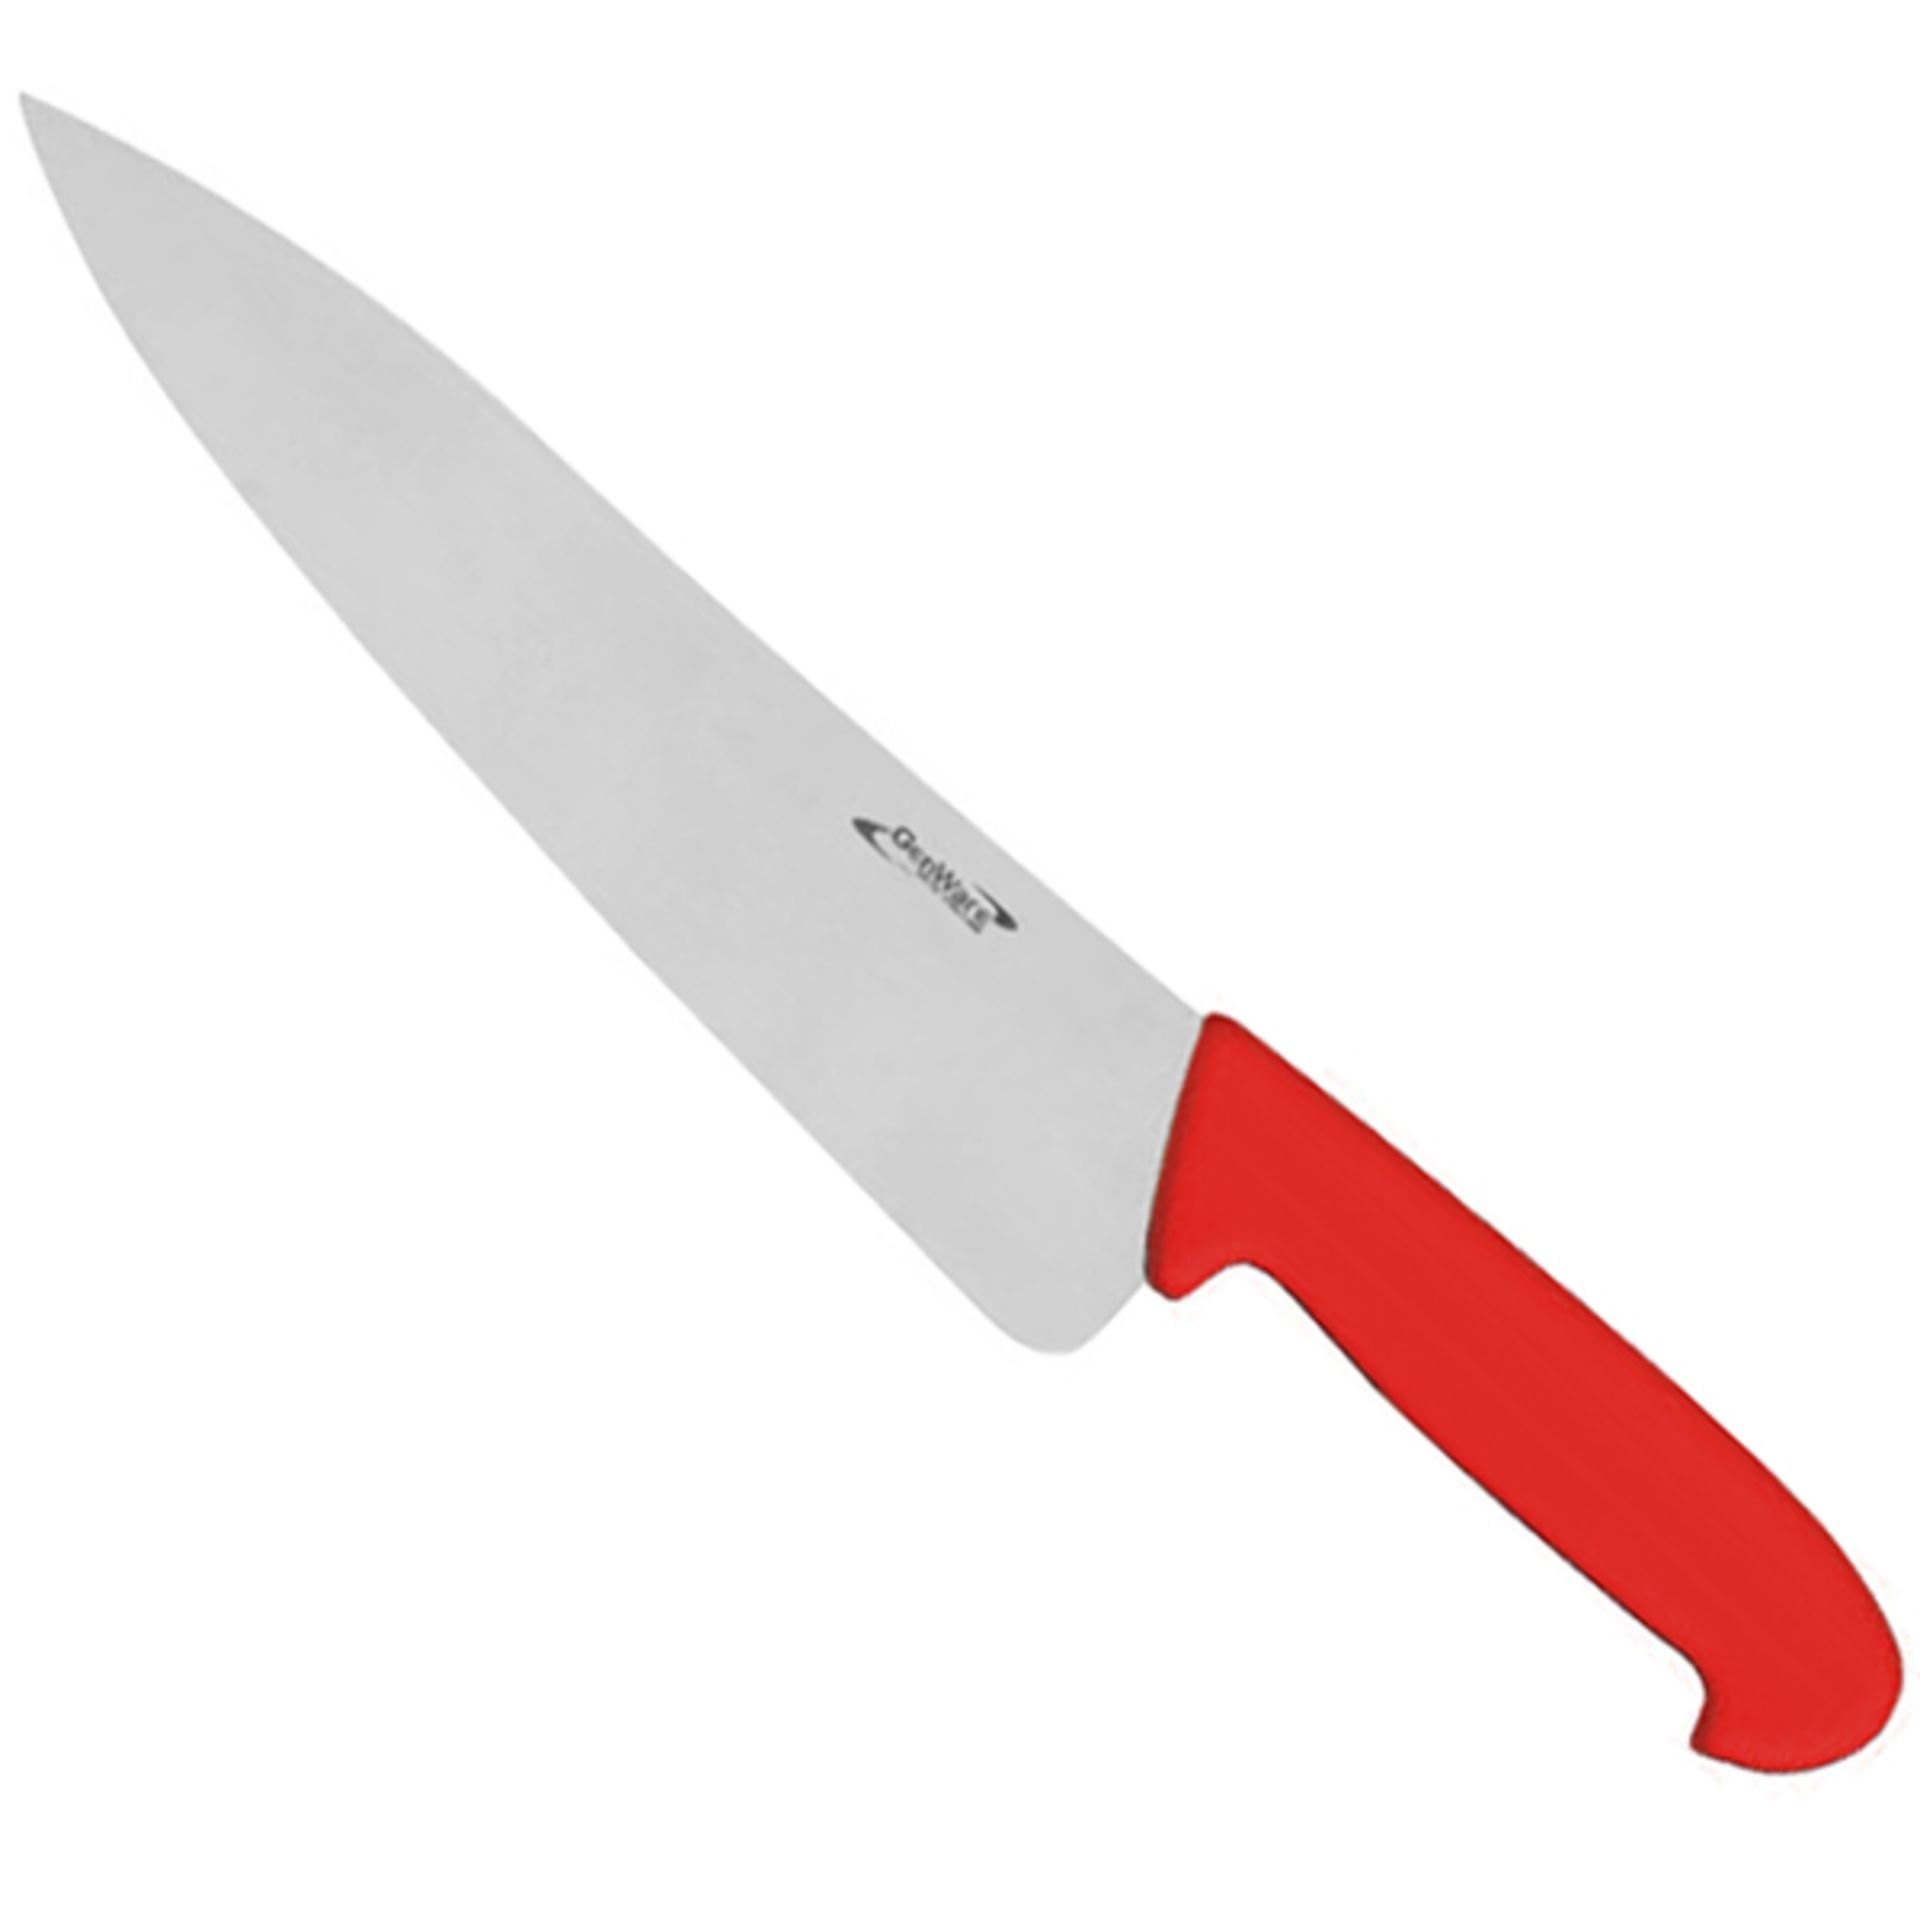 V Brand New GenWare 10 inch Red Handled Chefs Knife ISP £16.16 Allianceonline X 2 YOUR BID PRICE